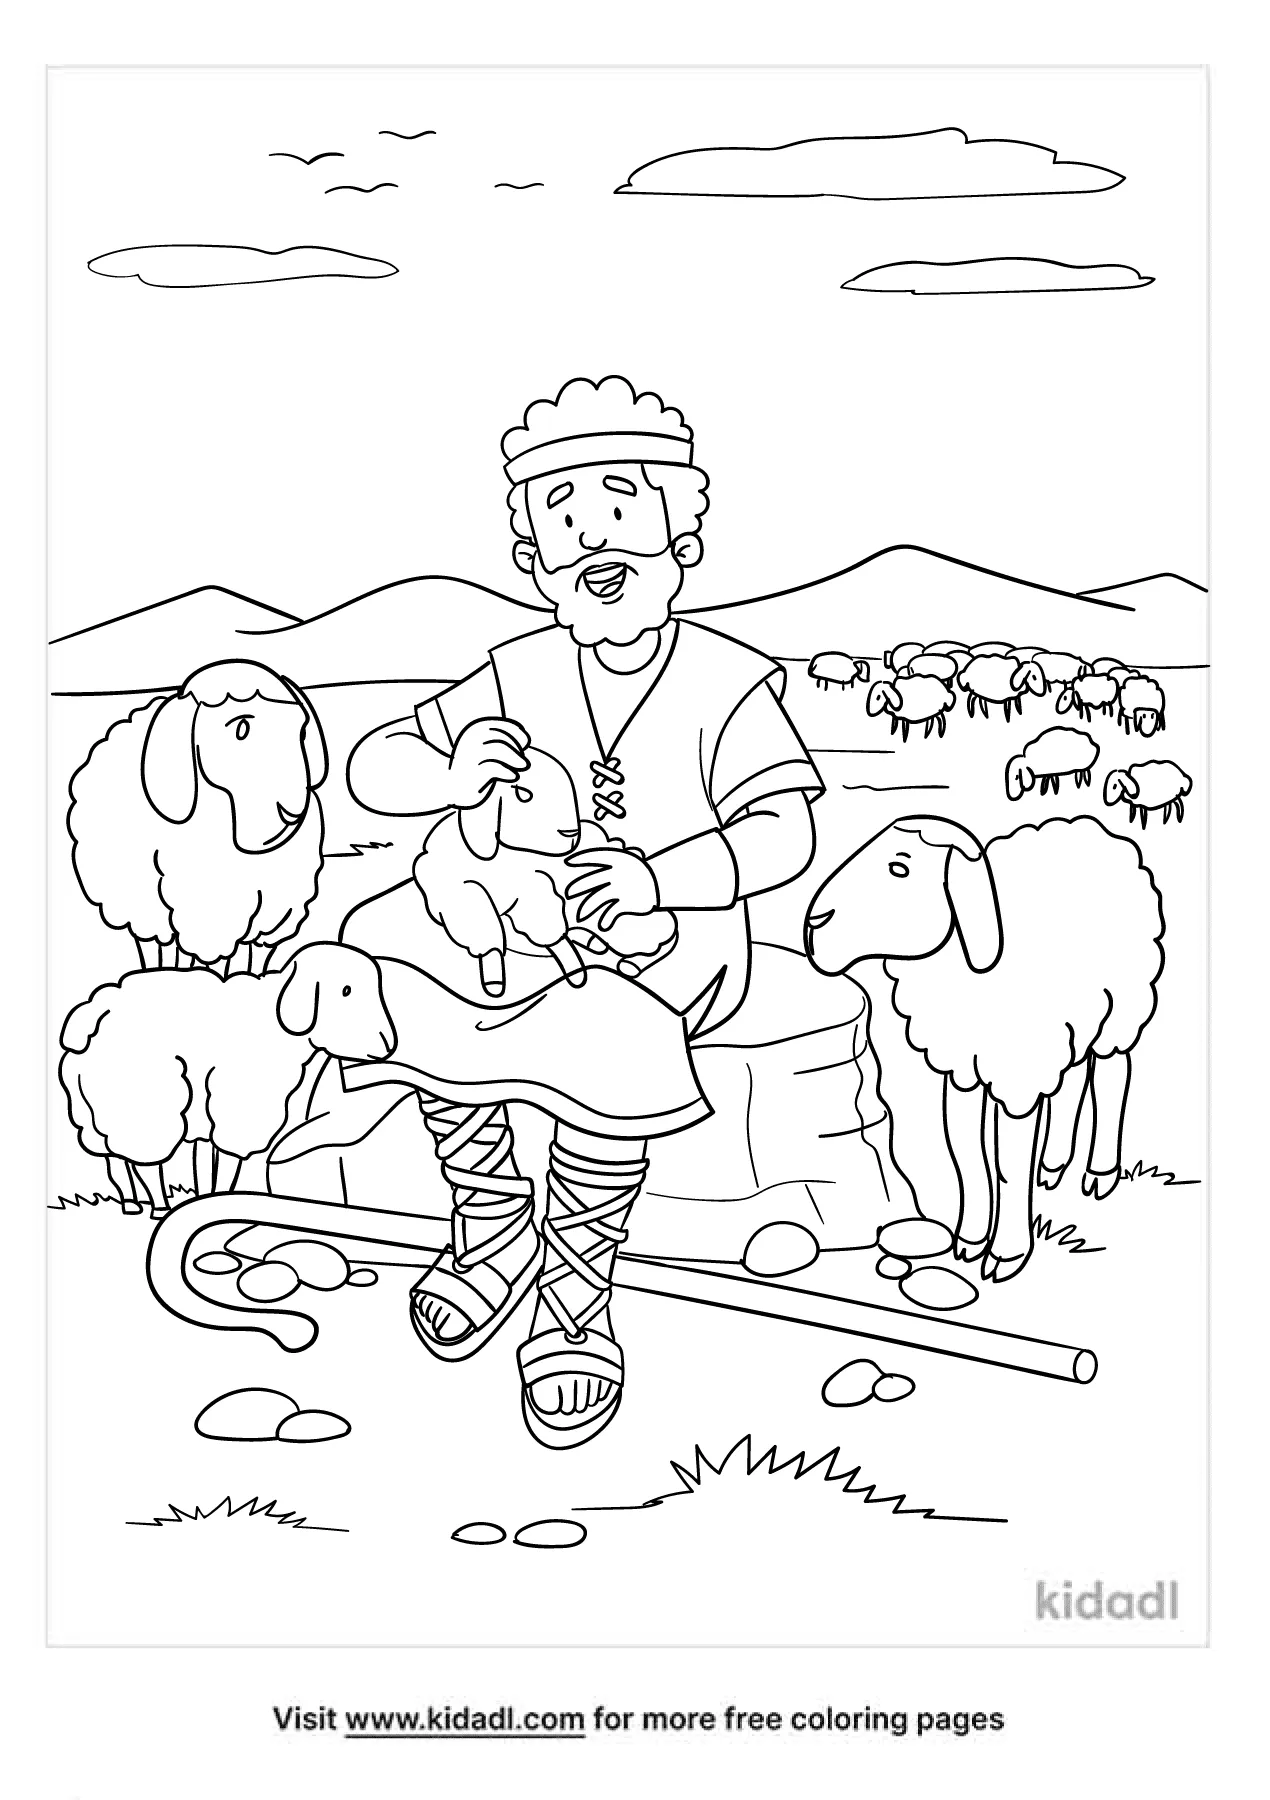 Free Abel The Shepherd Coloring Page | Coloring Page Printables | Kidadl